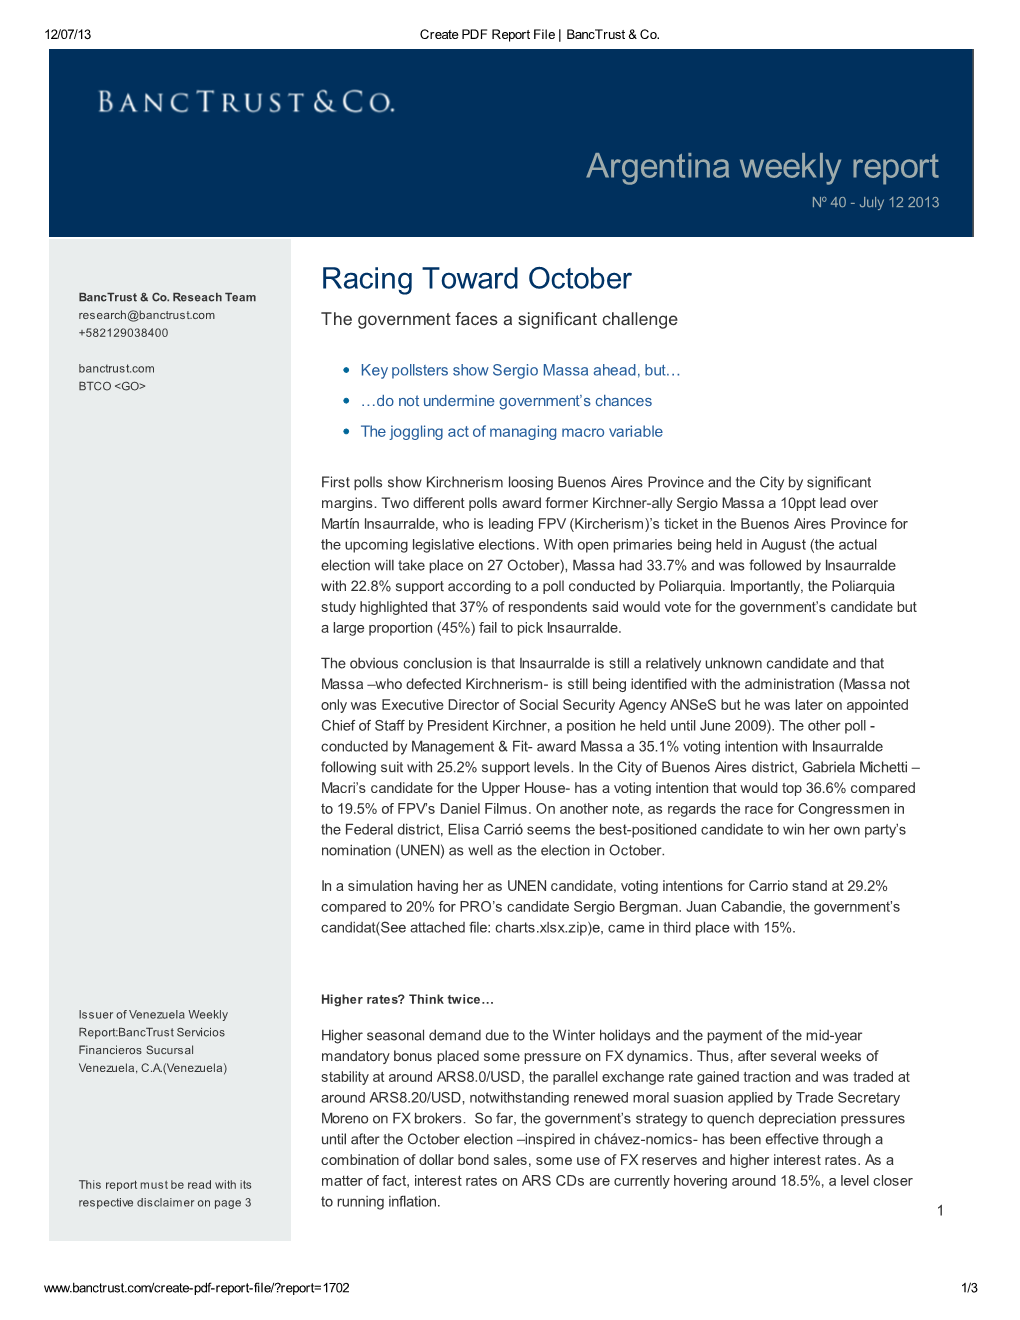 Argentina Weekly Report Nº 40 - July 12 2013